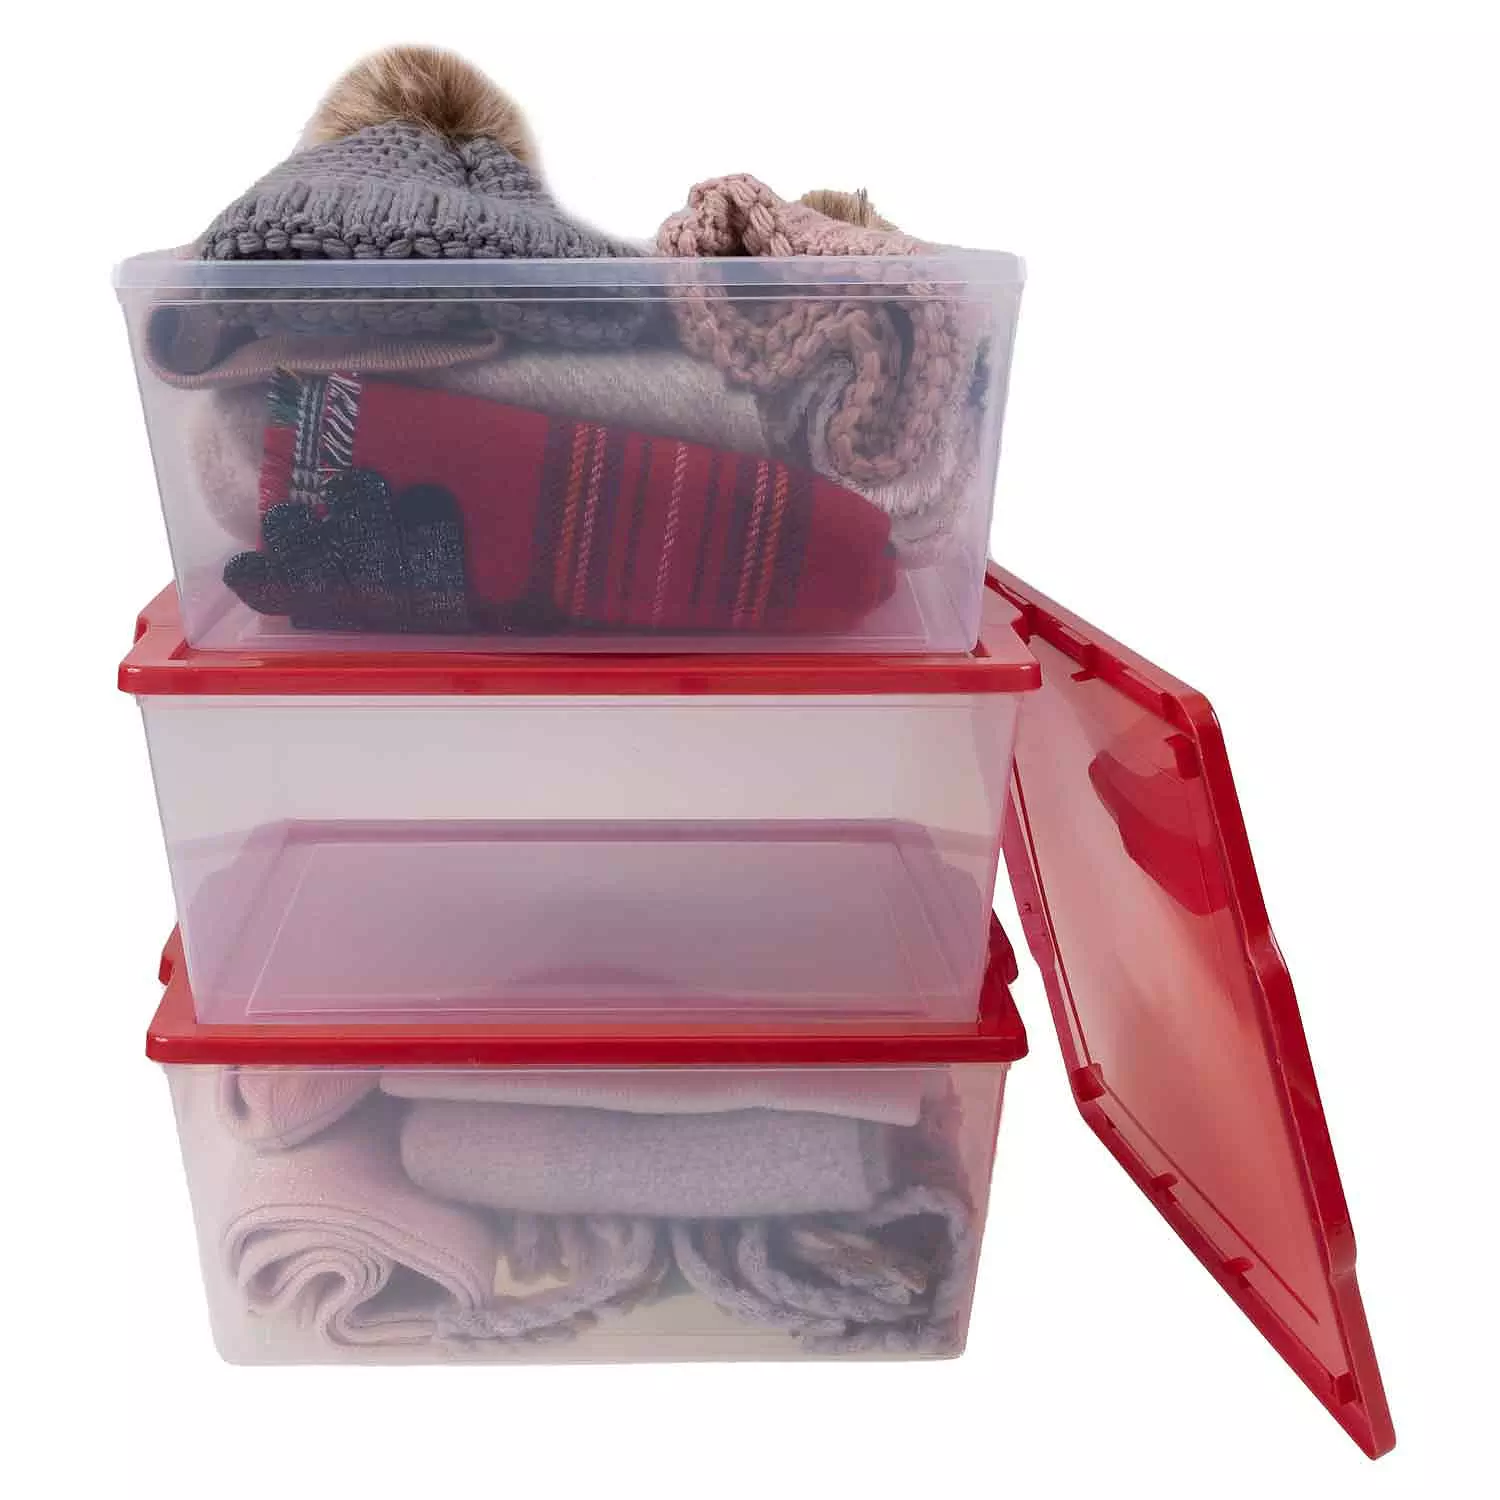 Set of 3 clear storage totes - 3x19.4L